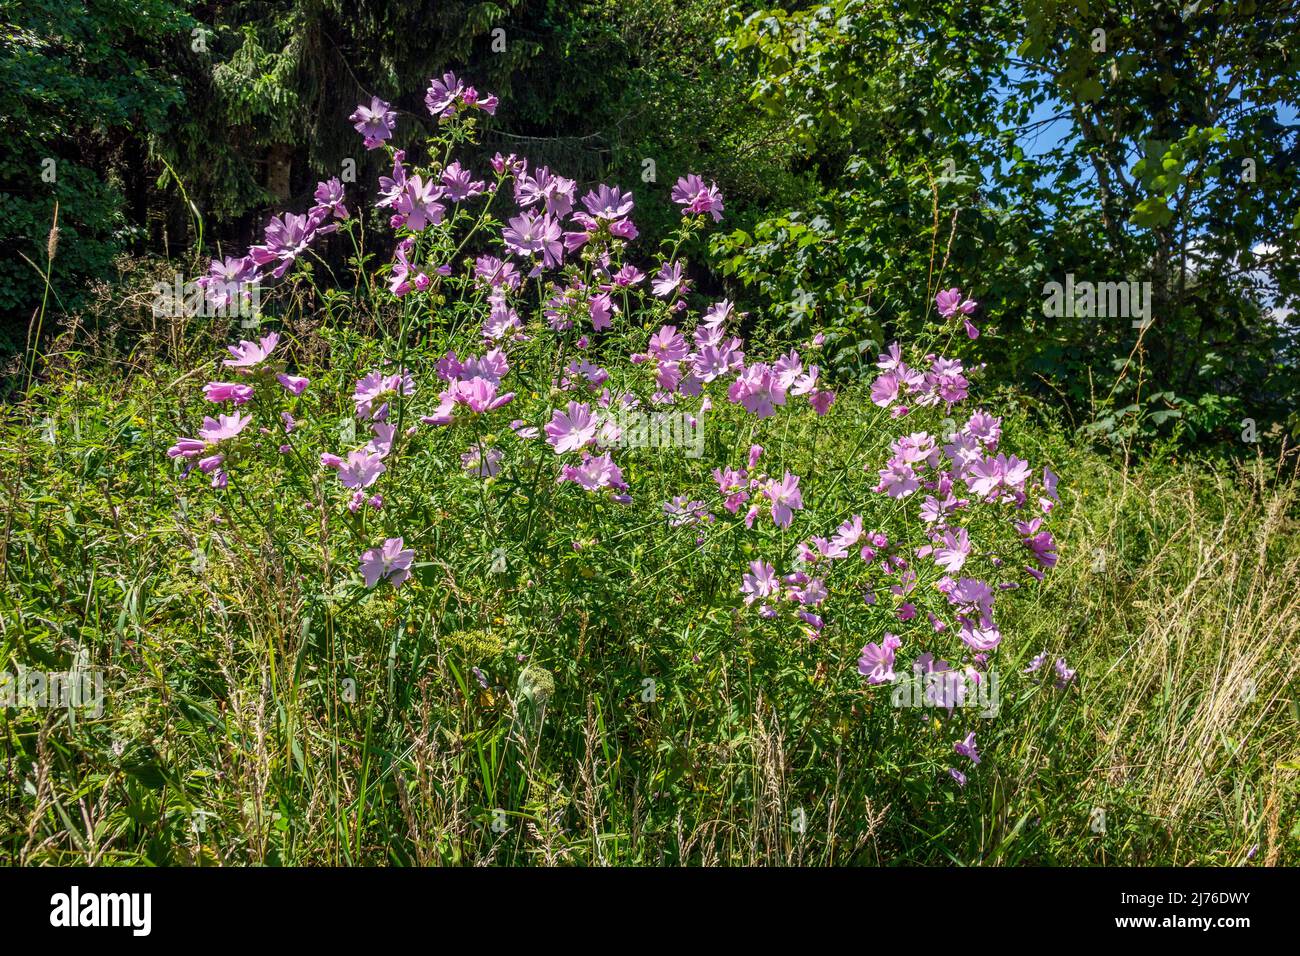 Germany, the rose mallow, also called rose mallow, pointed-leaved mallow, Sigmarskraut or Siegmarswurz, is a plant belonging to the mallow genus in the mallow family (Malvaceae). Stock Photo